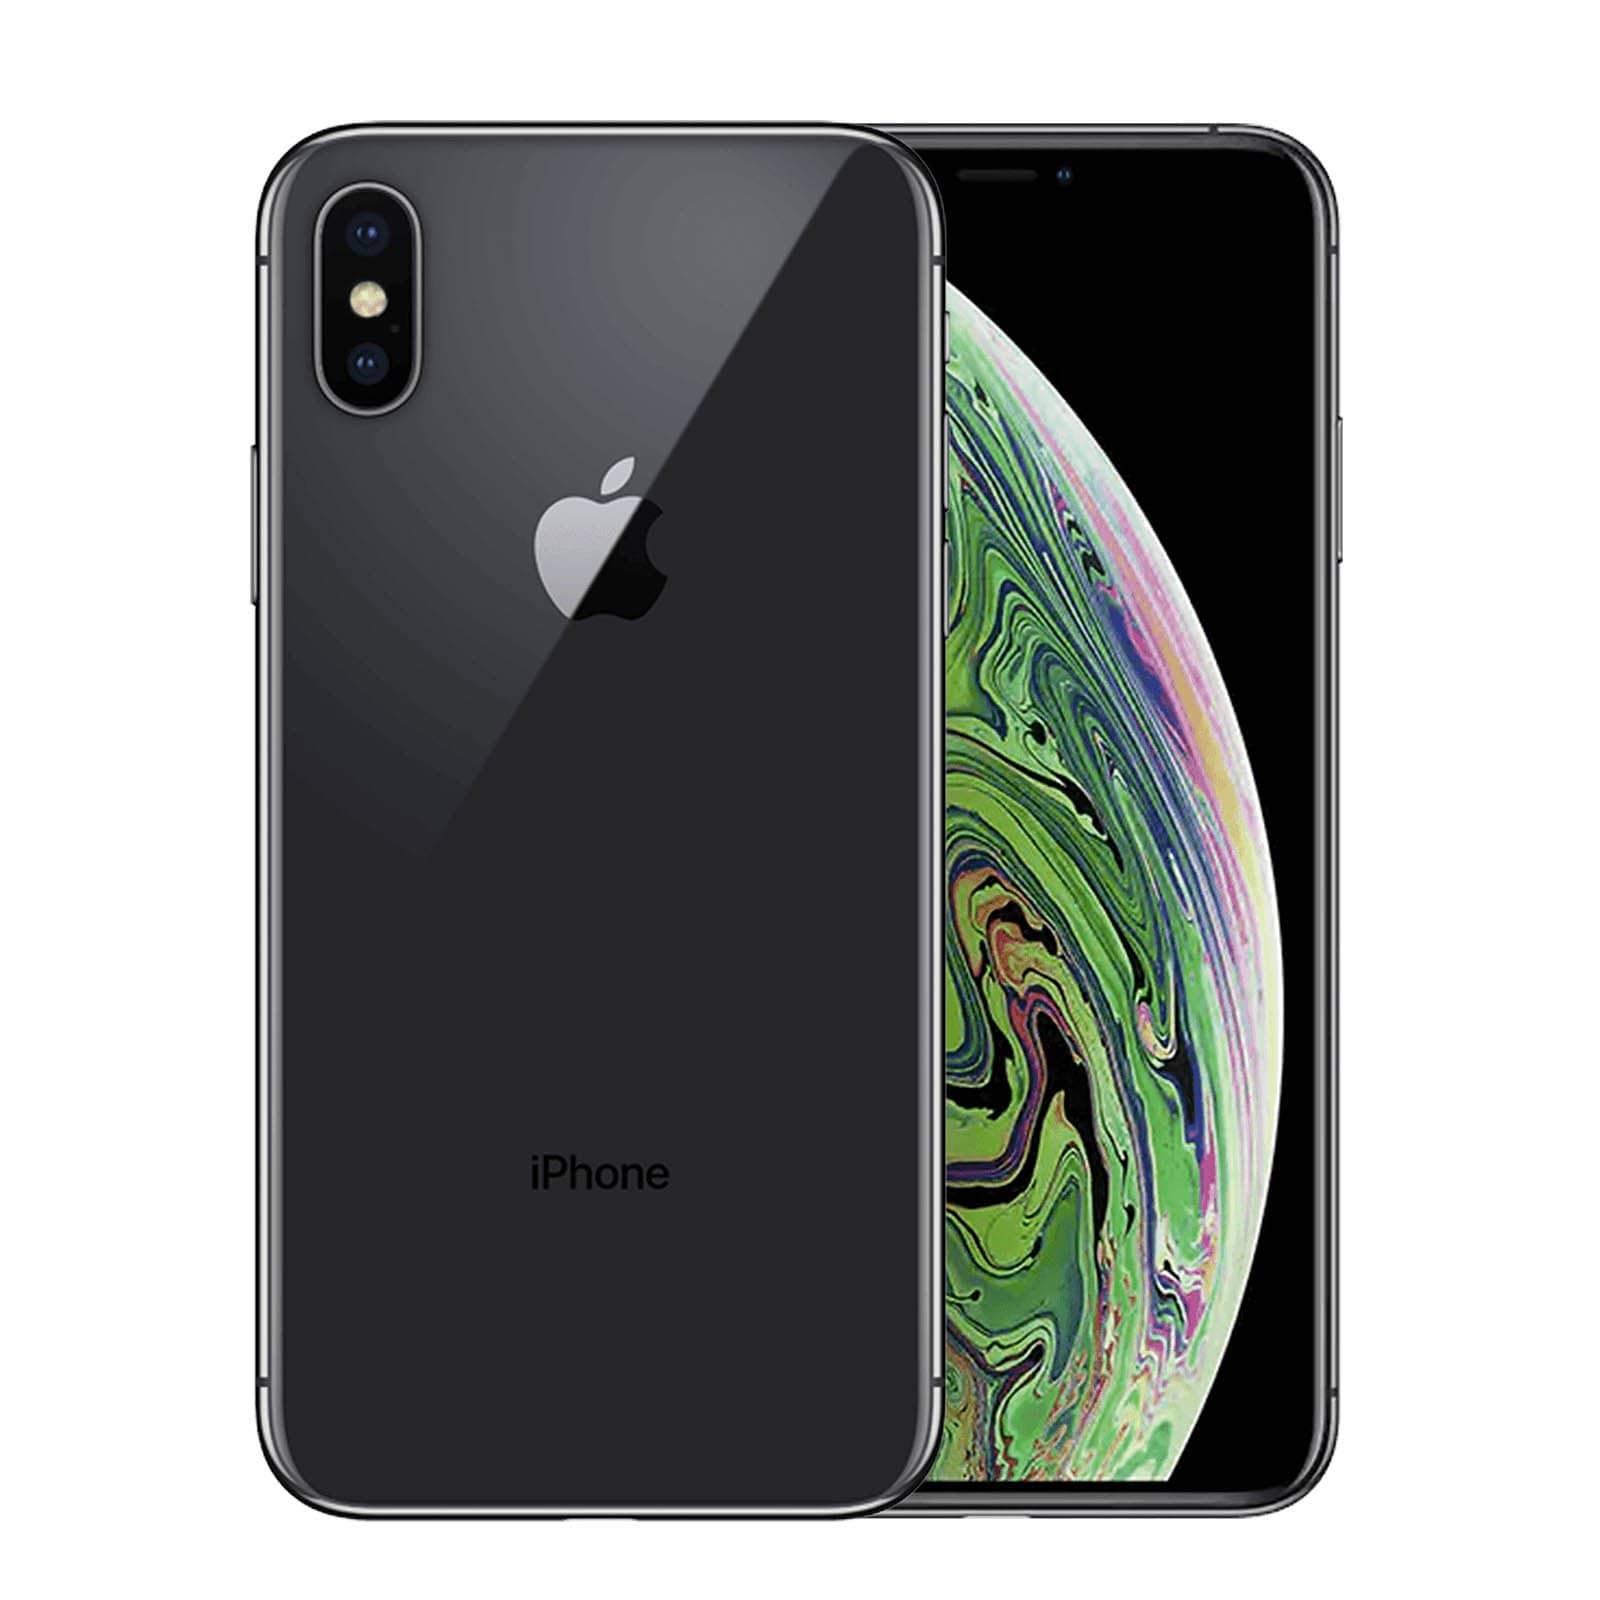 Apple iPhone XS Max 512GB Space Grey Very Good - Unlocked 512GB Space Grey Very Good